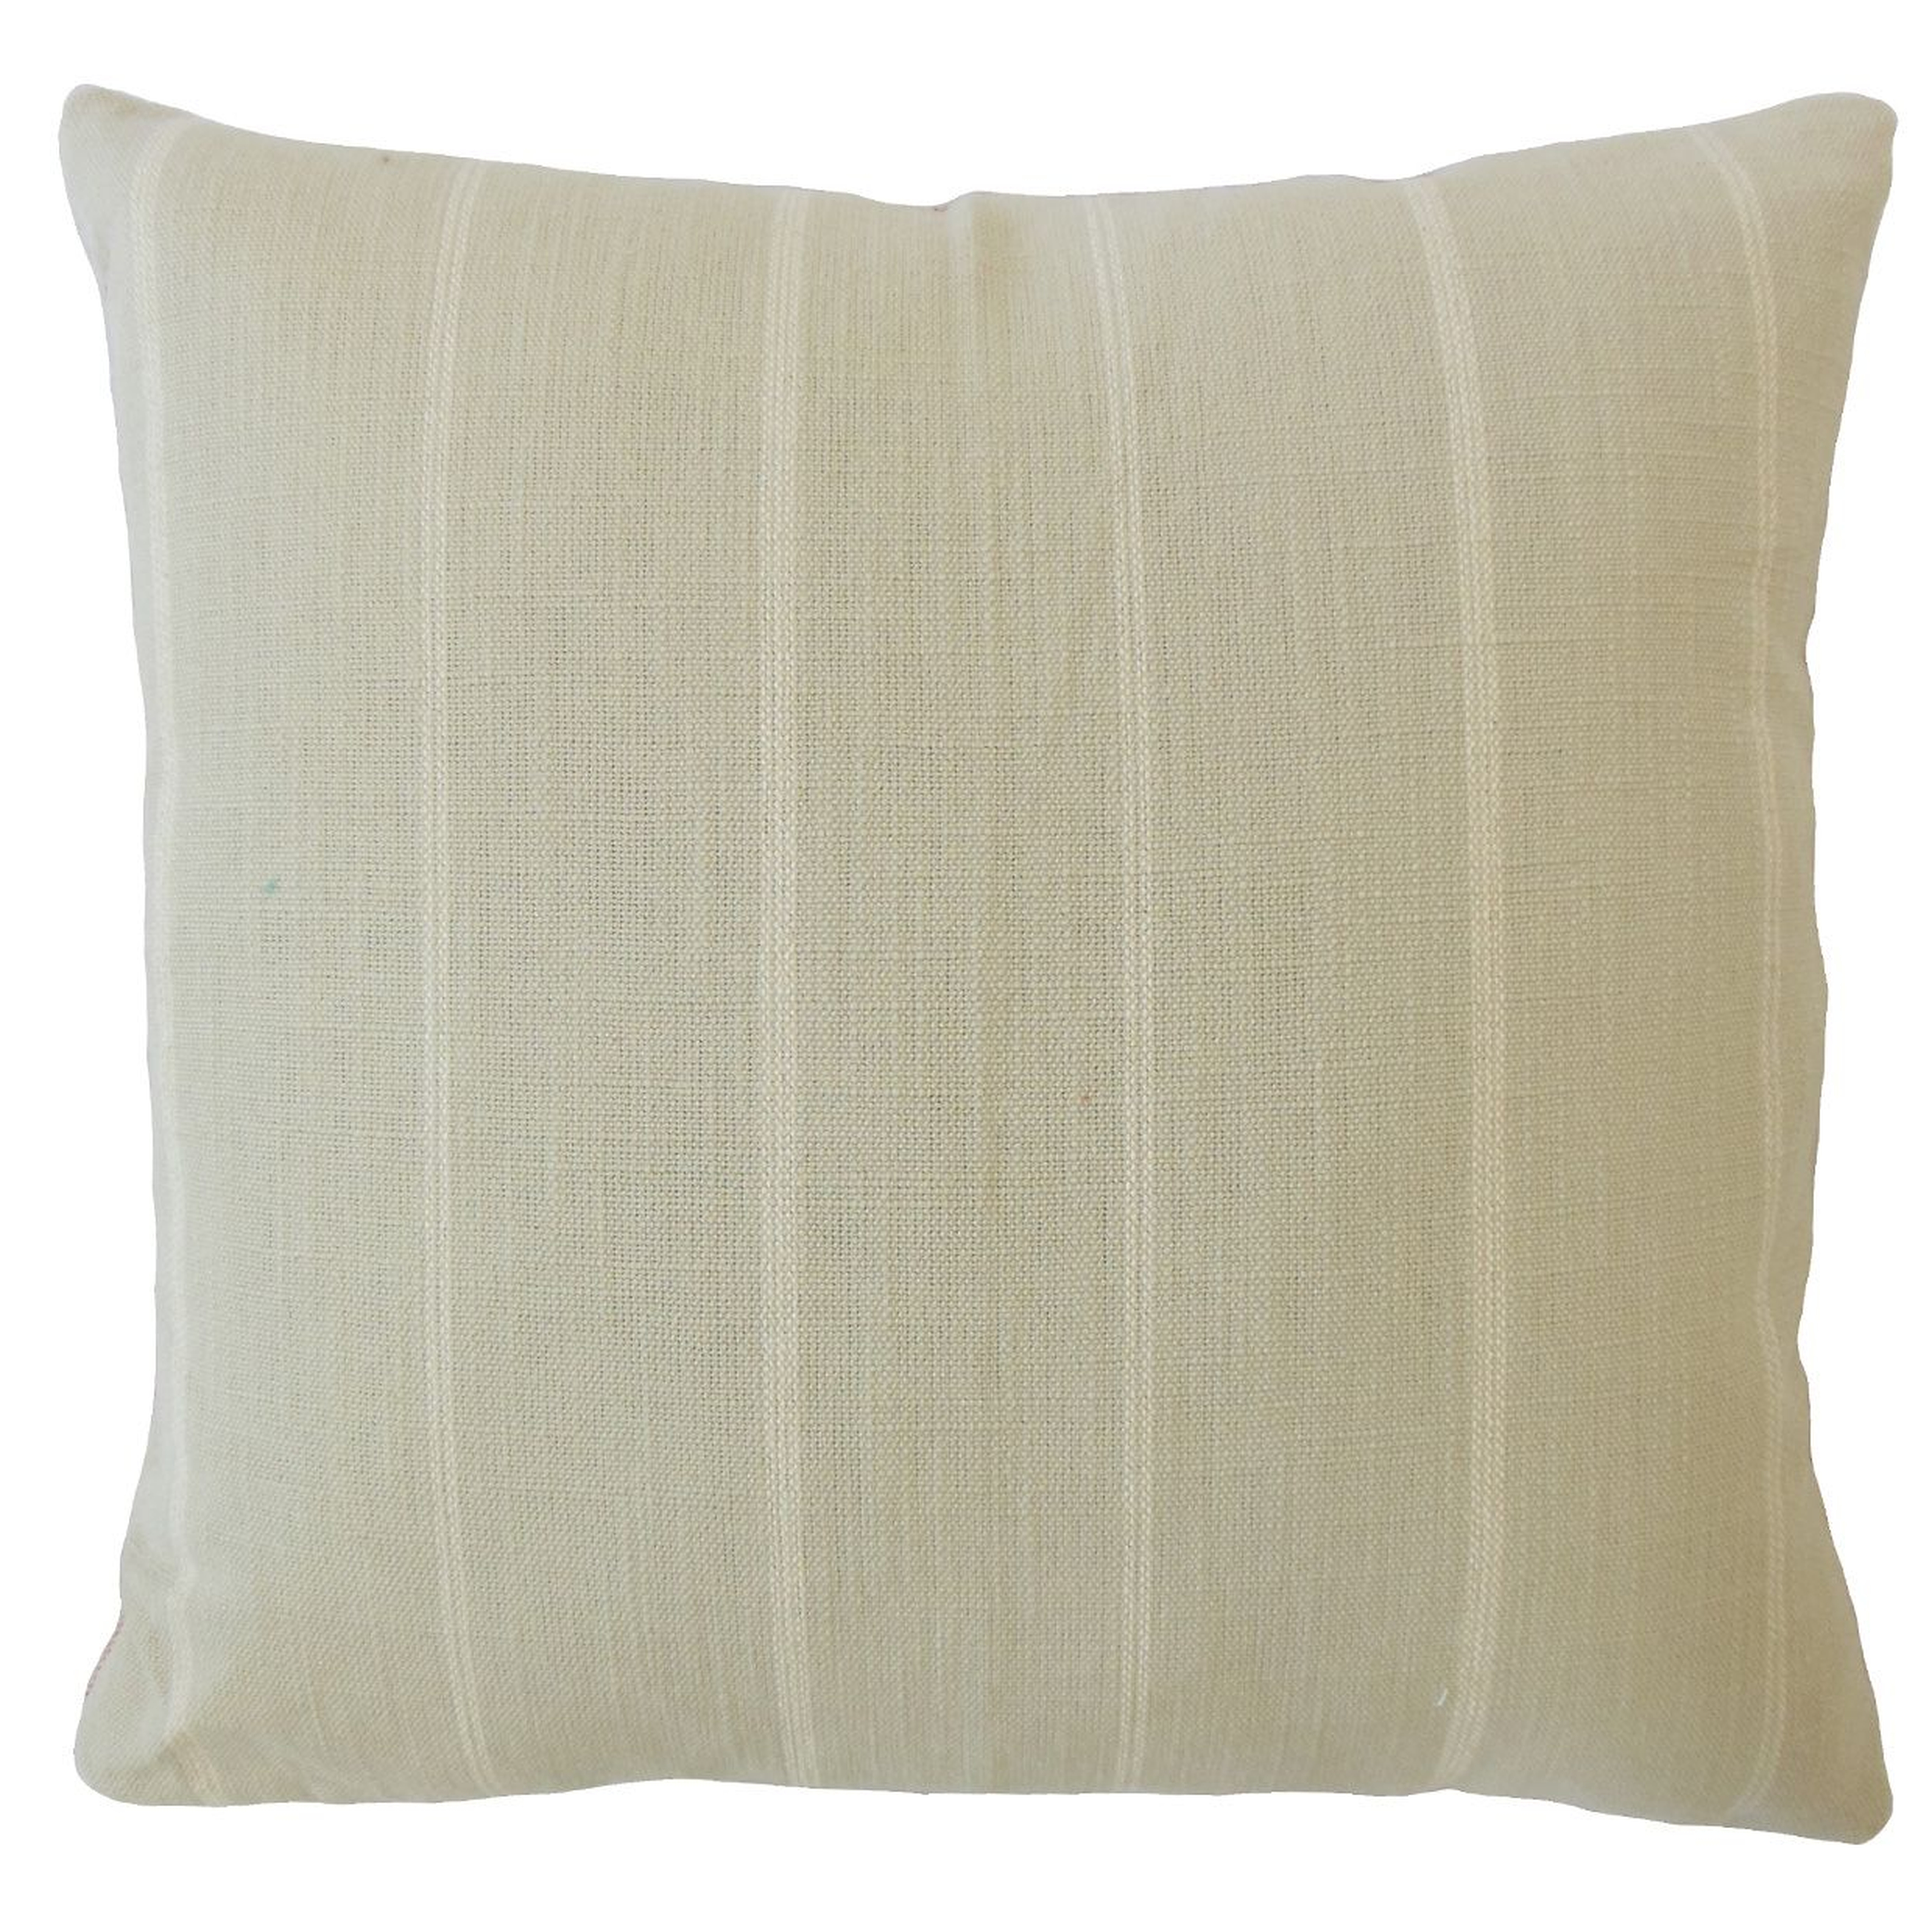 Tailored Stripe Pillow, Dove, 20" x 20" - Havenly Essentials